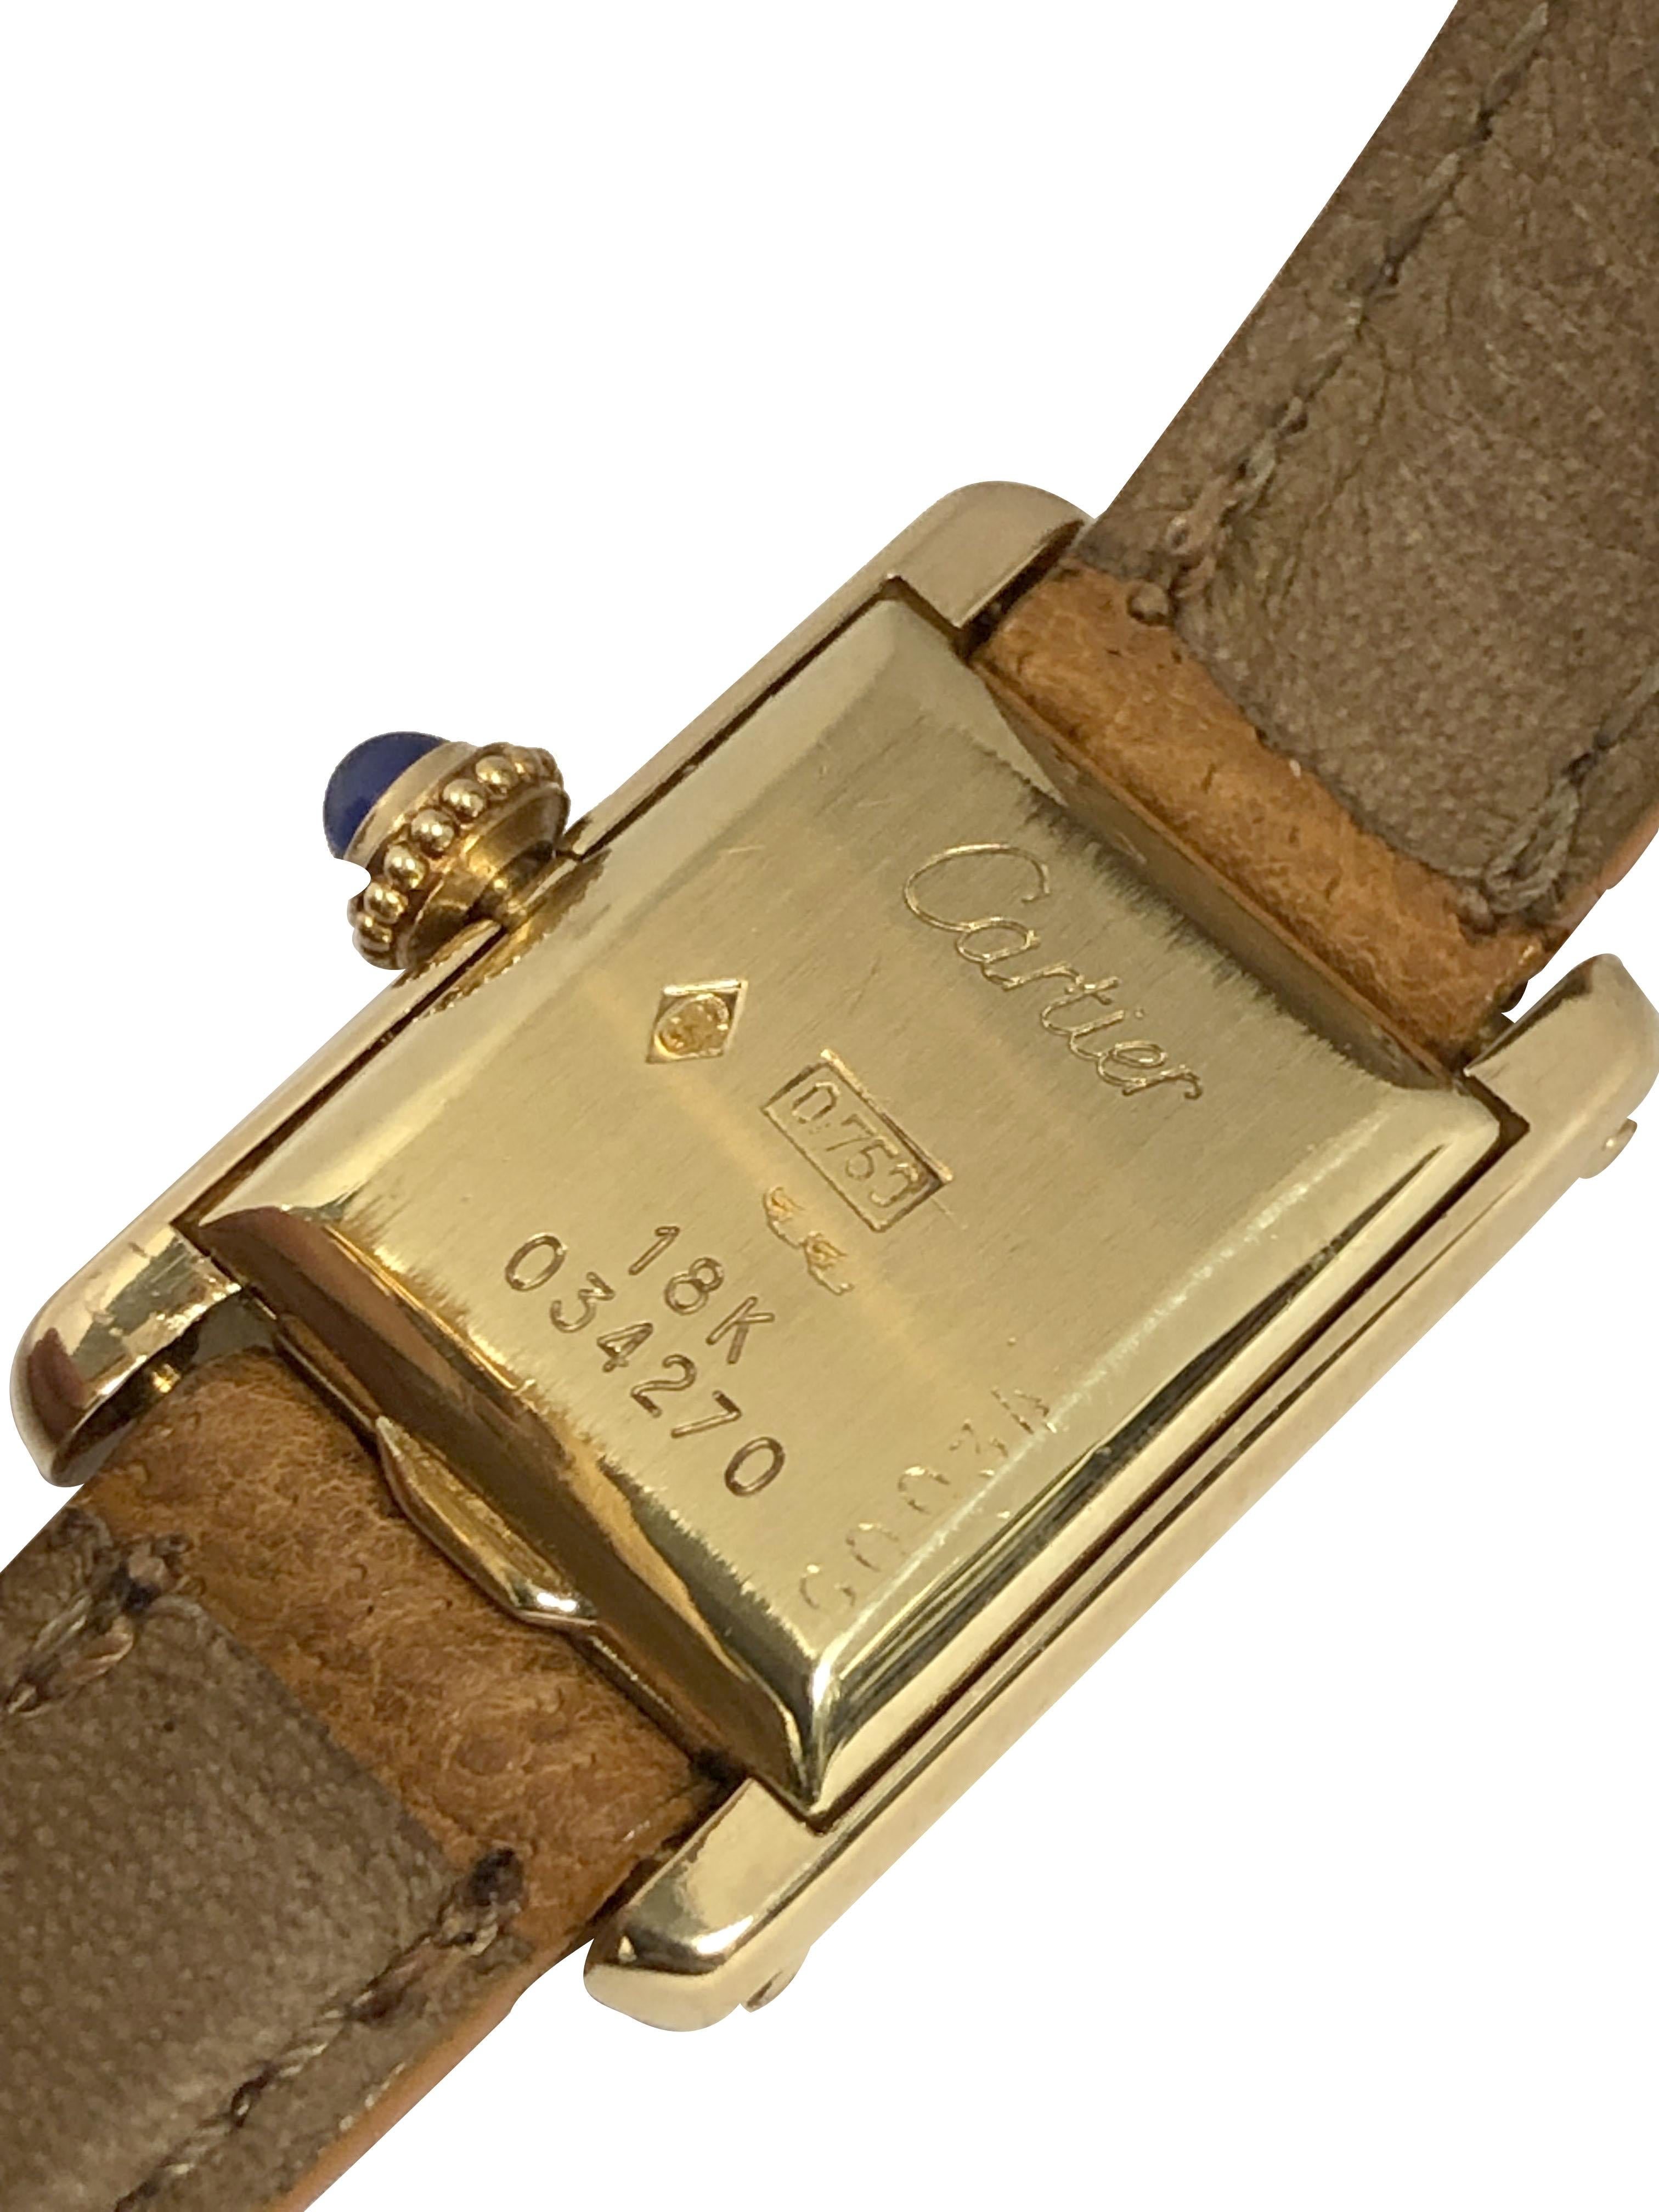 Circa 1970s Scarce and Hard to Find Mini Tank Wrist Watch, 23 x 15 M.M. (  lugs included in length ) 2 piece 18k Yellow Gold Case. Cartier Inc. Mechanical, Manual wind Nickle lever movement, Sapphire set crown. 10 M.M wide Cartier Tan Leather Strap